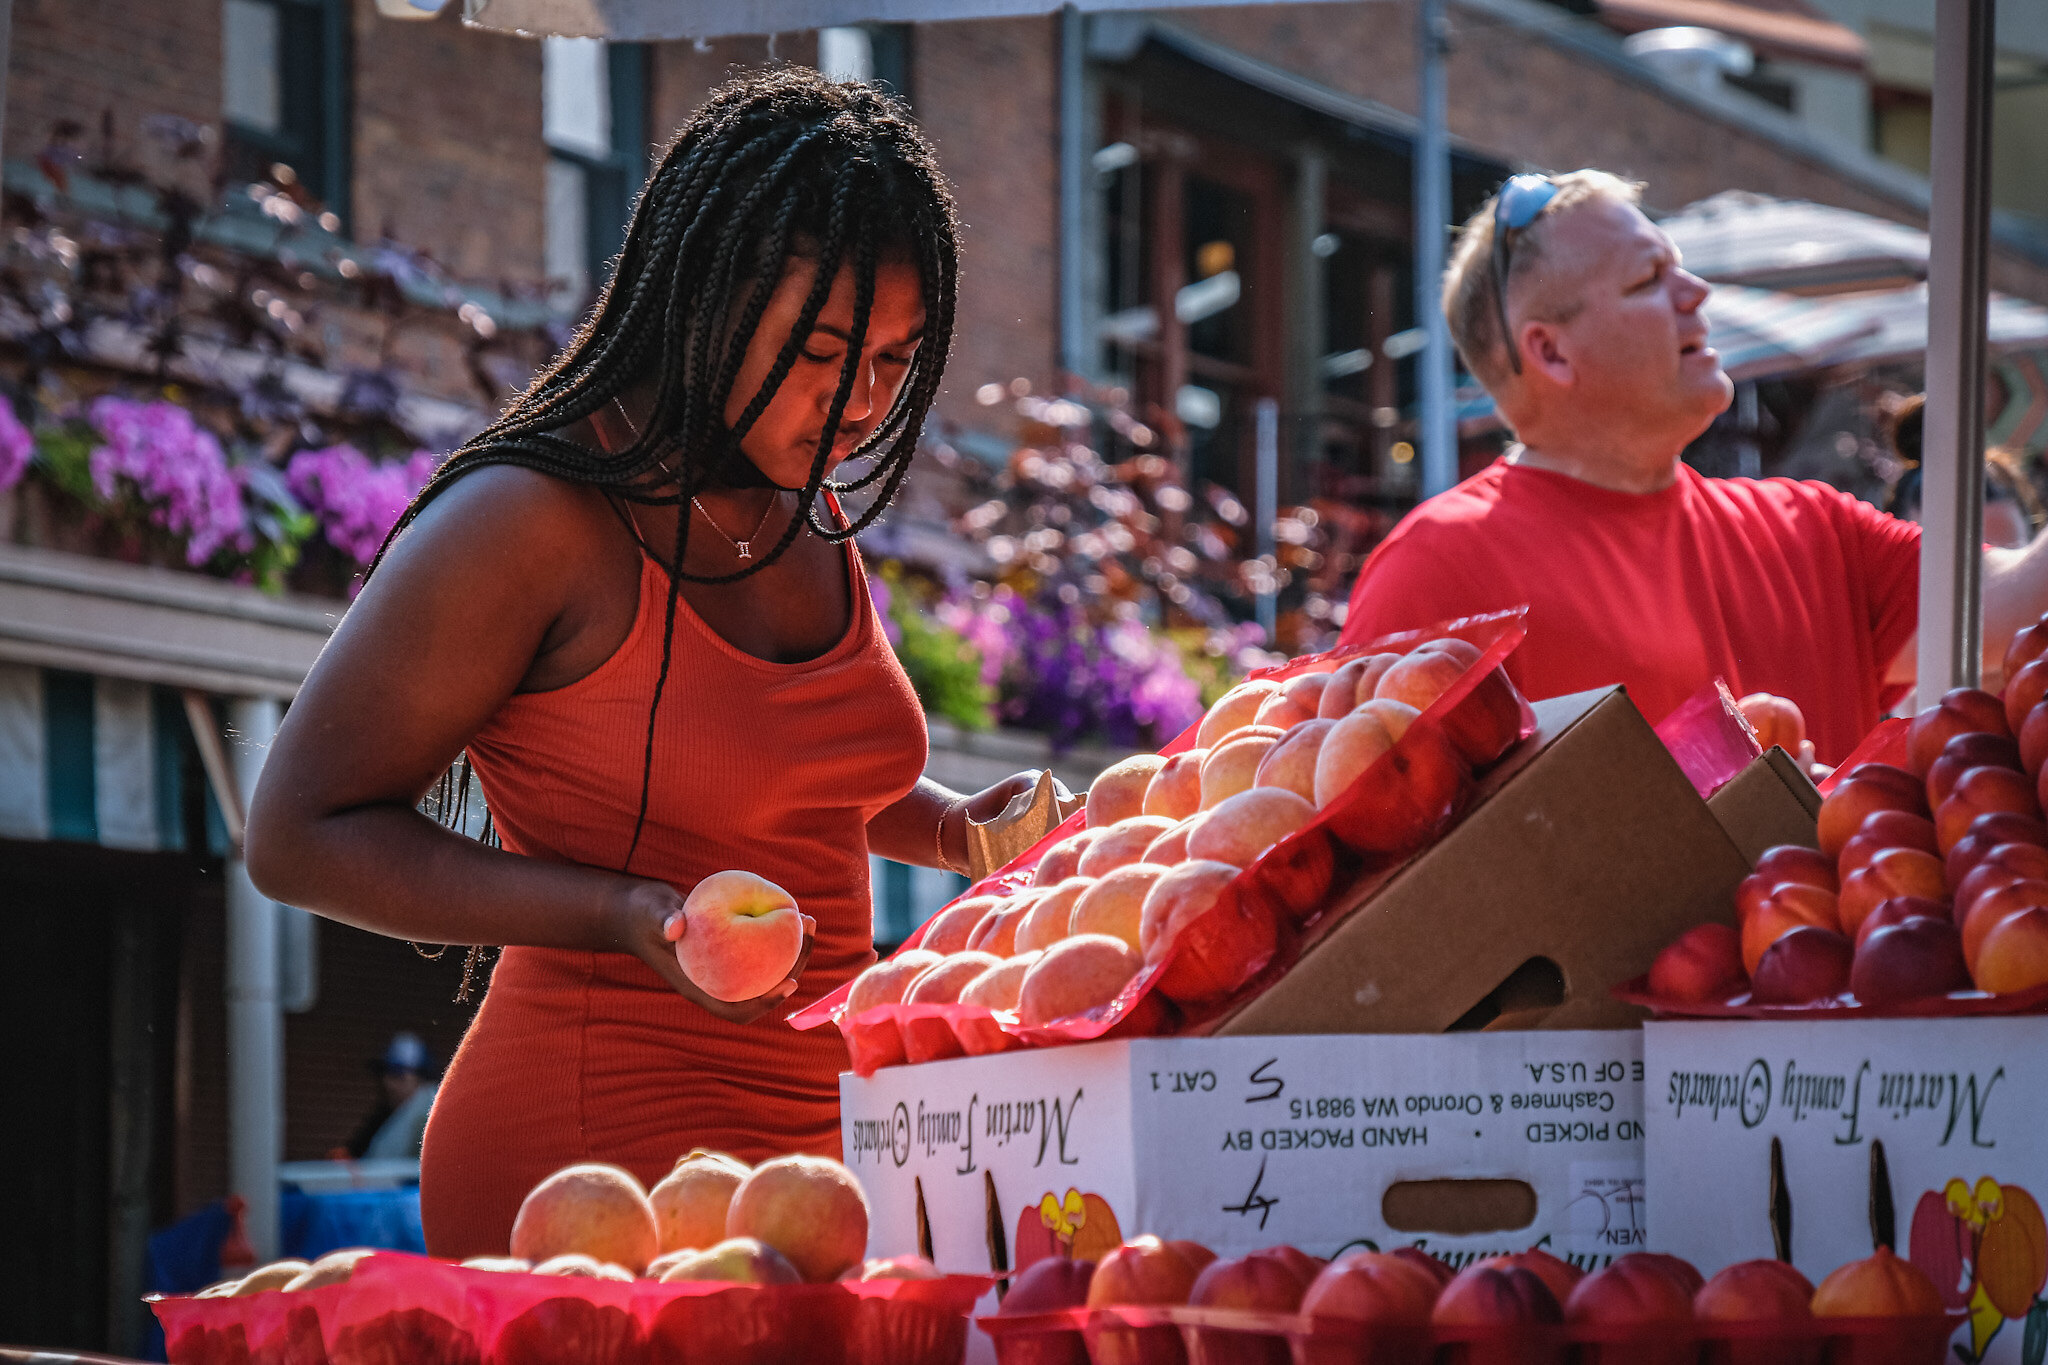 A young woman selecting peaches from a farmer's market stall.